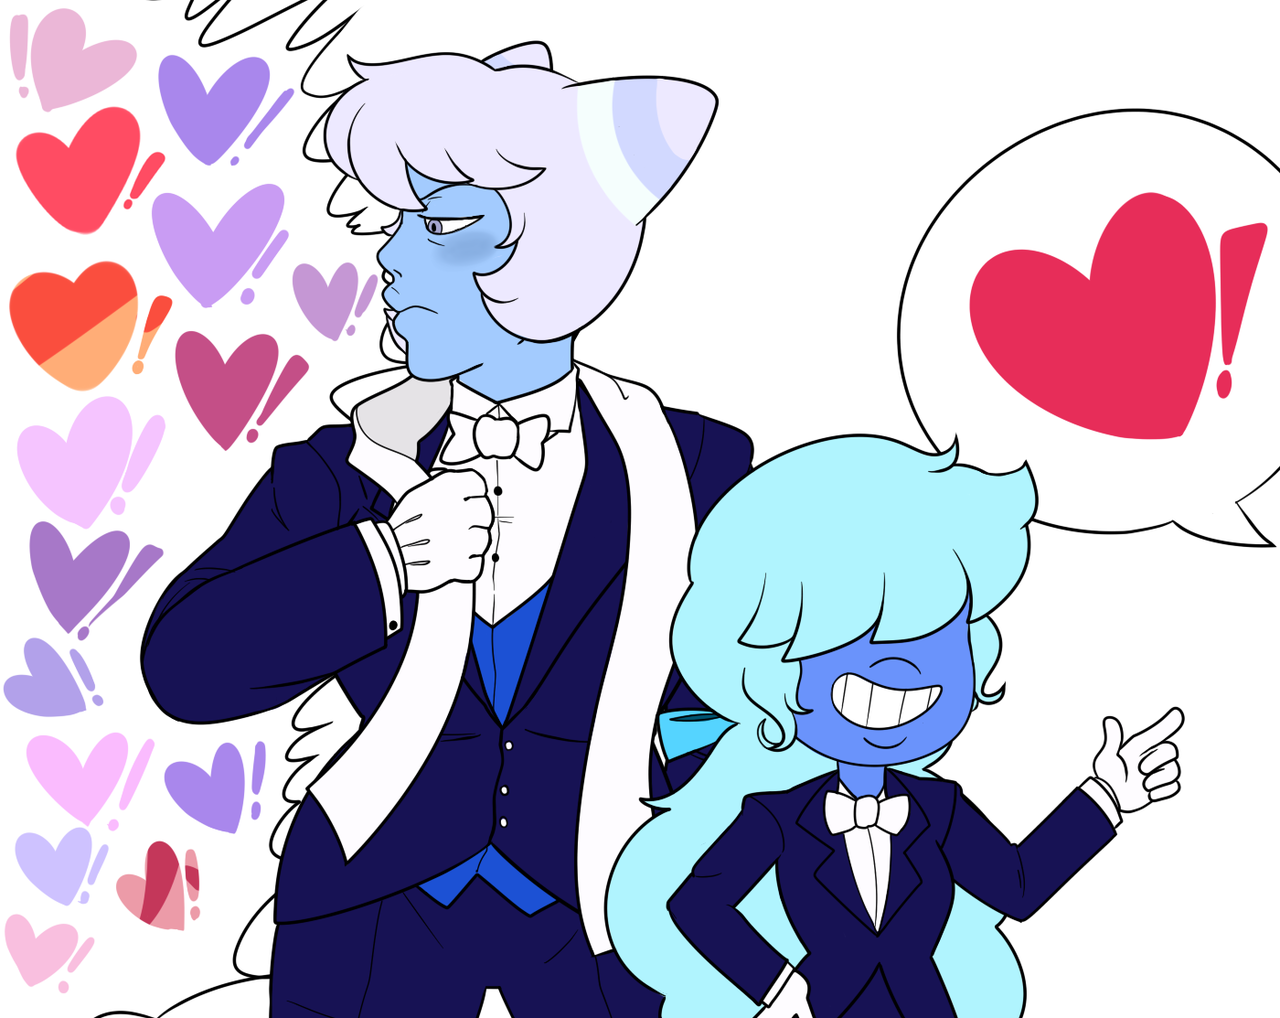 A snazzy pair of blue’s